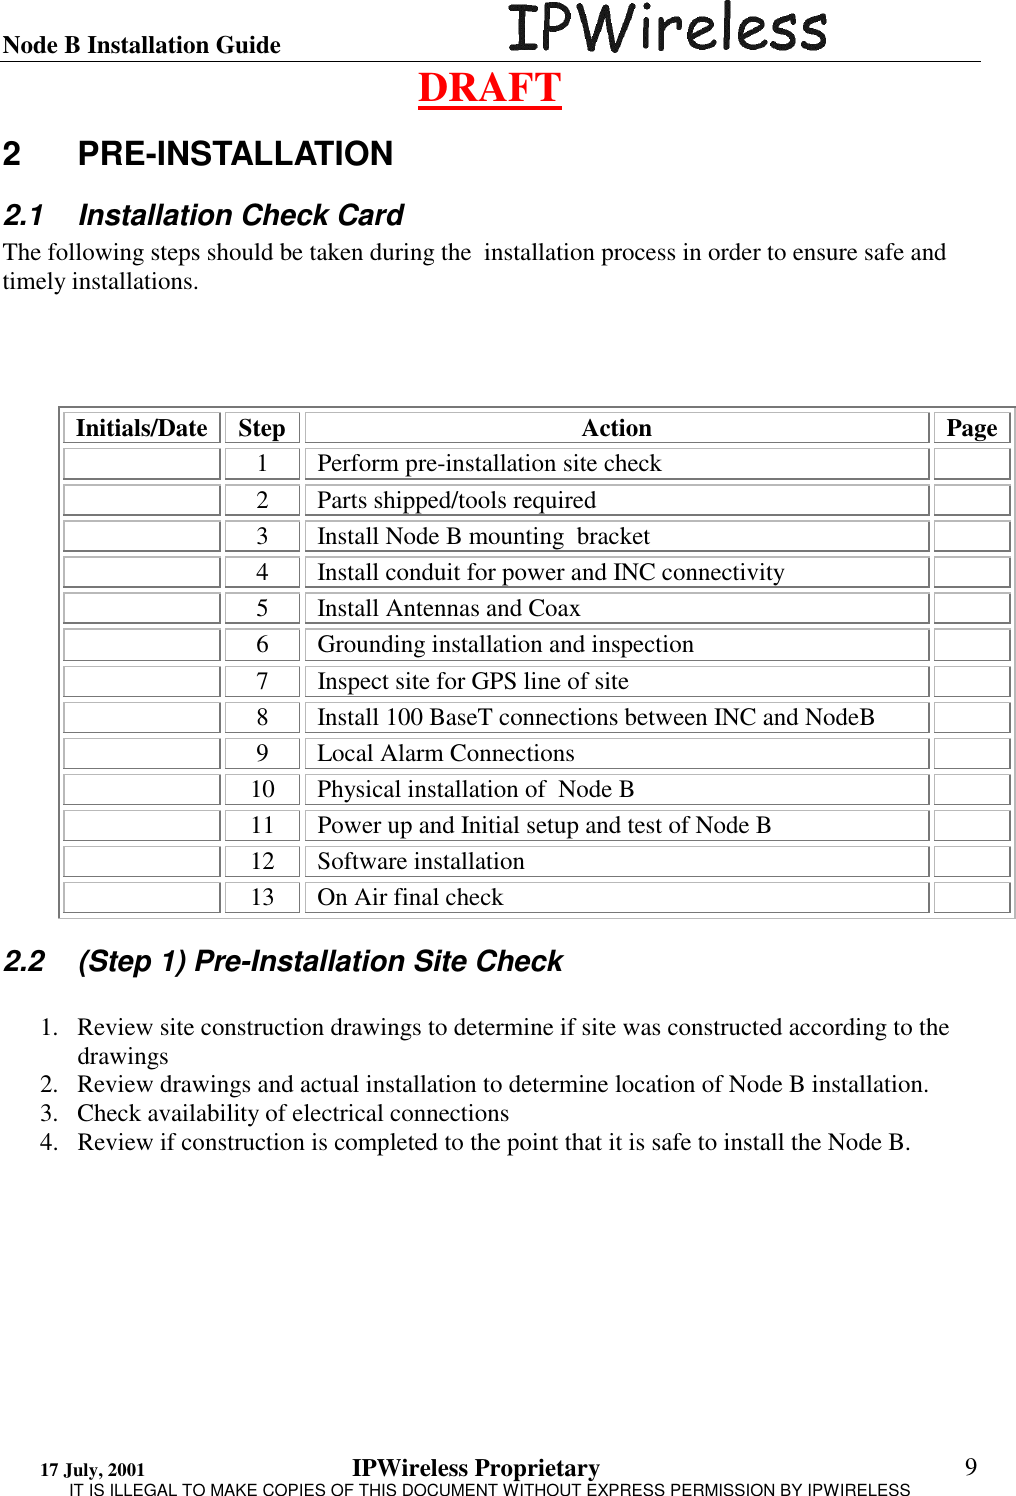 Node B Installation Guide                                      DRAFT 17 July, 2001                                 IPWireless Proprietary                                                  IT IS ILLEGAL TO MAKE COPIES OF THIS DOCUMENT WITHOUT EXPRESS PERMISSION BY IPWIRELESS  9 2 PRE-INSTALLATION 2.1  Installation Check Card The following steps should be taken during the  installation process in order to ensure safe and timely installations.      Initials/Date Step  Action  Page   1  Perform pre-installation site check     2  Parts shipped/tools required     3  Install Node B mounting  bracket     4  Install conduit for power and INC connectivity     5  Install Antennas and Coax     6  Grounding installation and inspection     7  Inspect site for GPS line of site     8  Install 100 BaseT connections between INC and NodeB      9  Local Alarm Connections     10  Physical installation of  Node B     11  Power up and Initial setup and test of Node B    12 Software installation     13  On Air final check   2.2  (Step 1) Pre-Installation Site Check  1.  Review site construction drawings to determine if site was constructed according to the drawings 2.  Review drawings and actual installation to determine location of Node B installation. 3.  Check availability of electrical connections 4.  Review if construction is completed to the point that it is safe to install the Node B. 